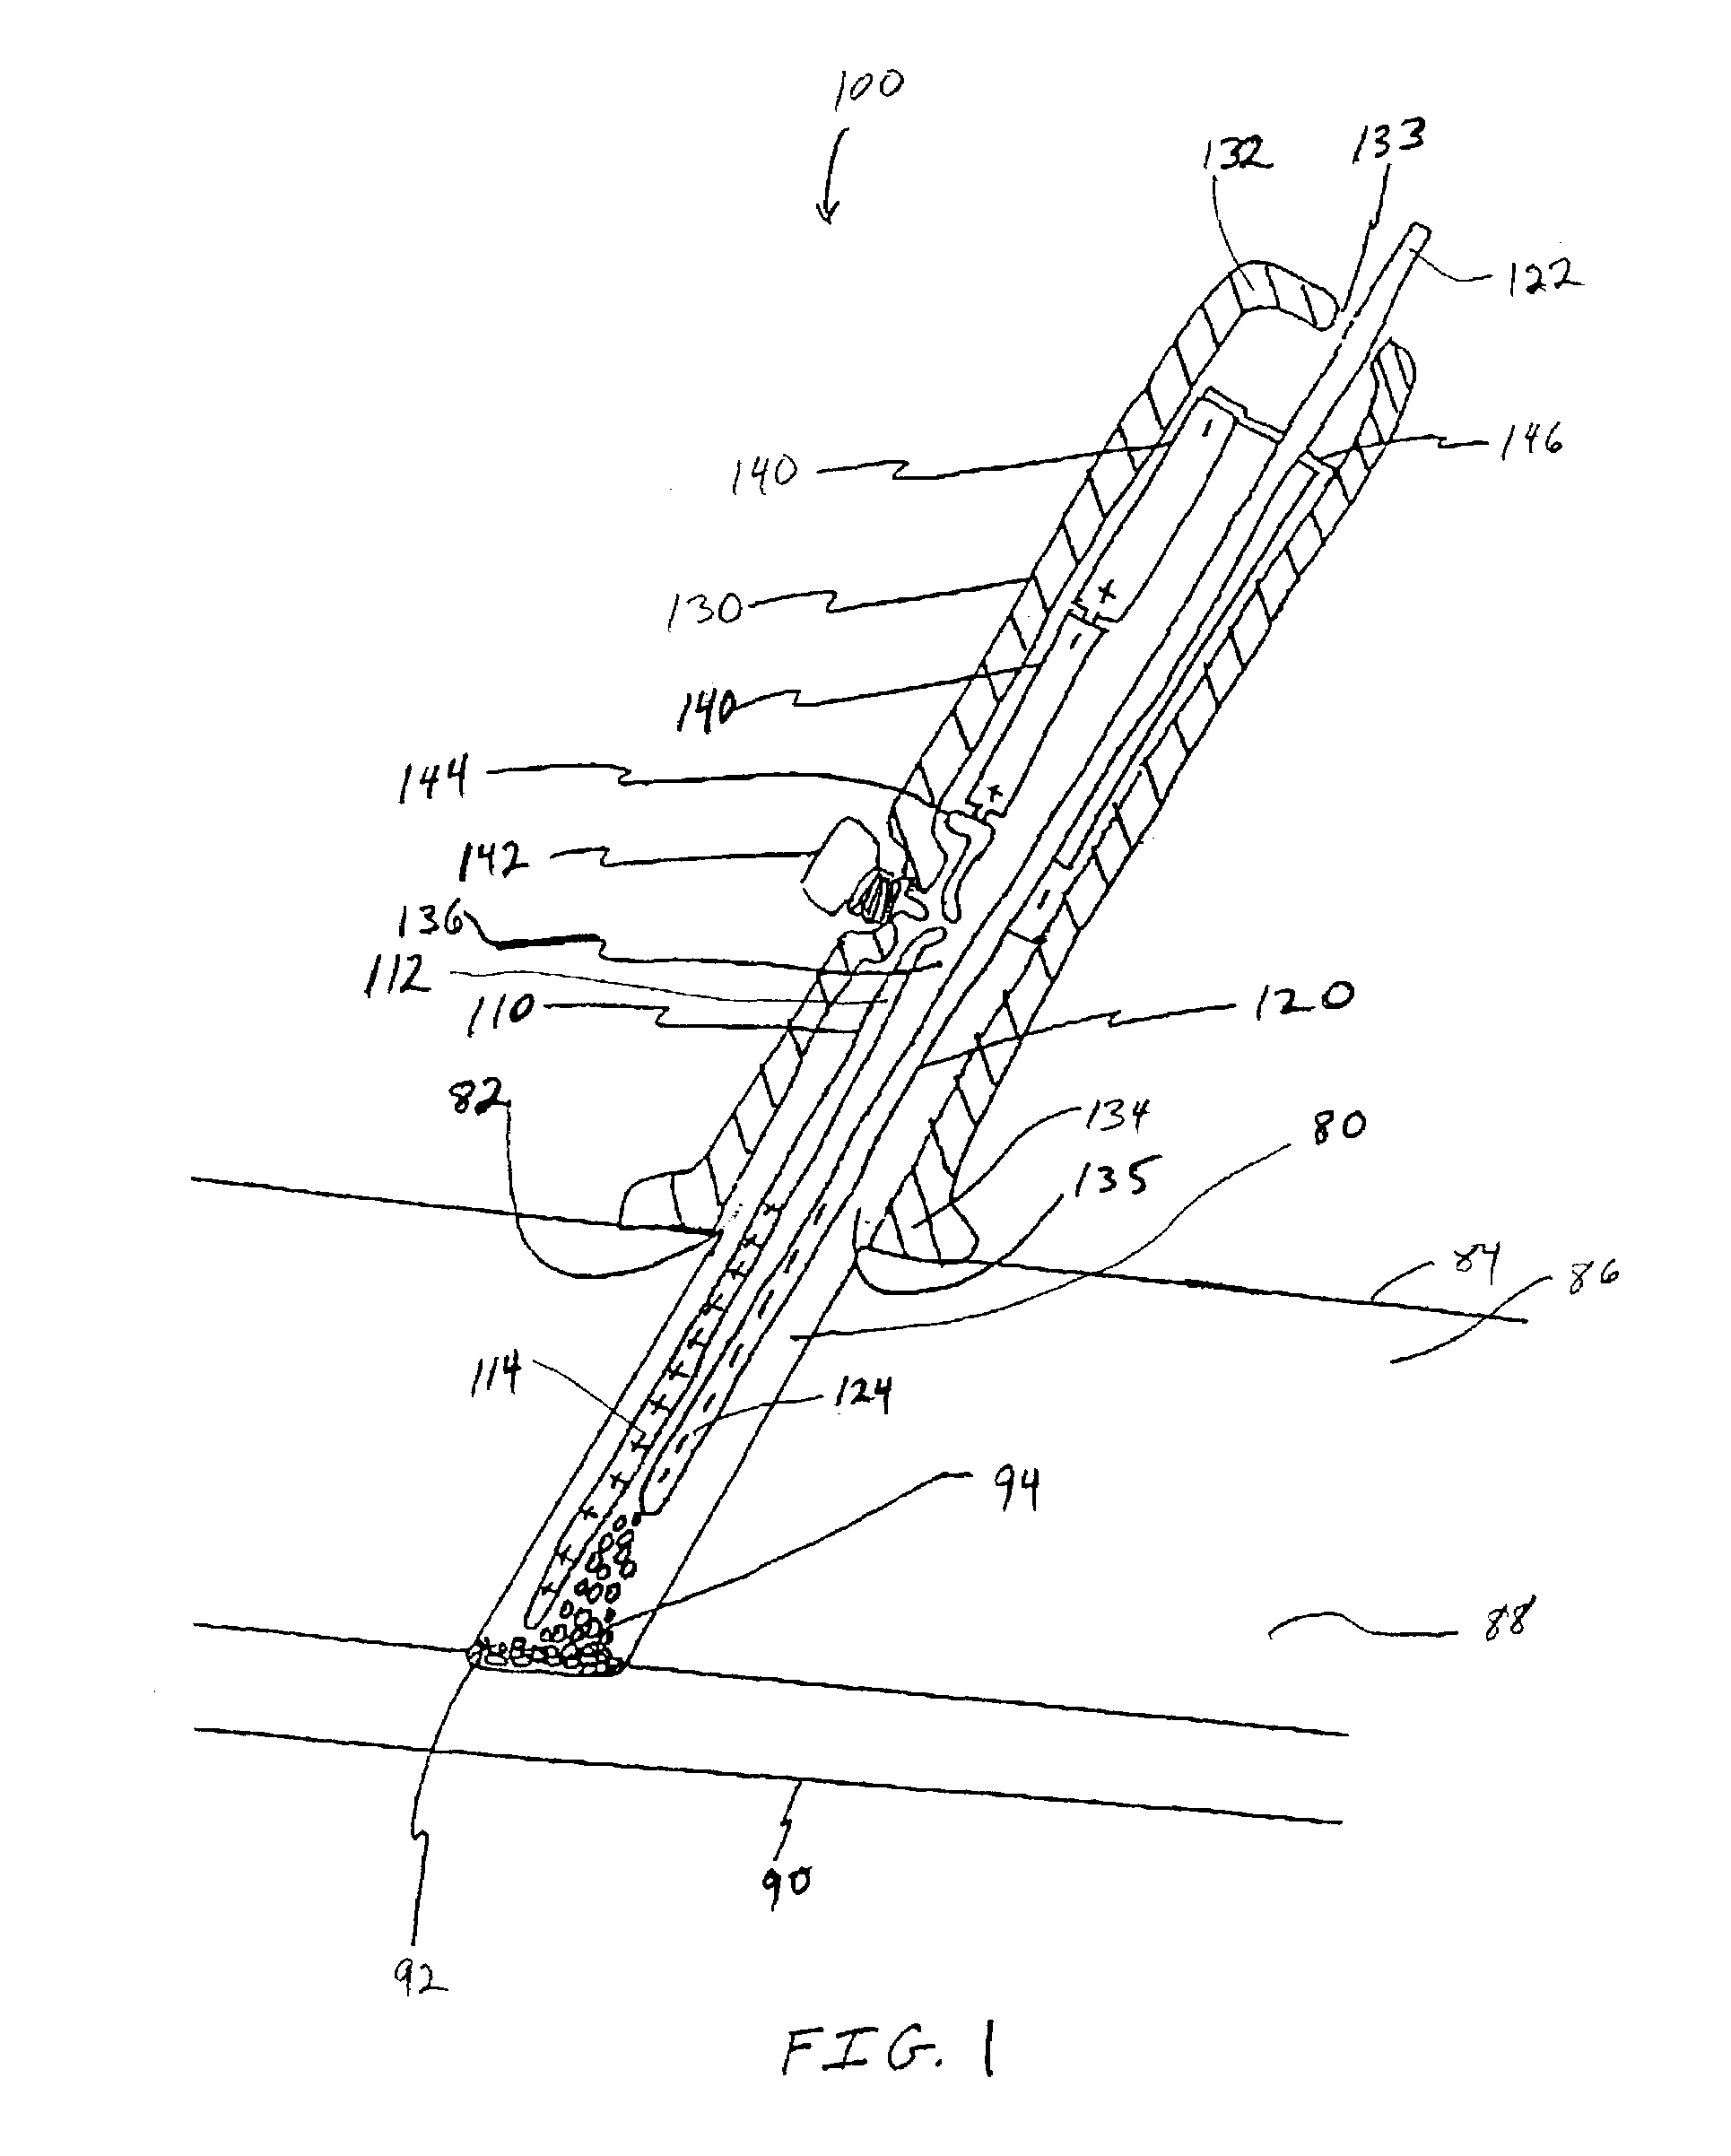 Apparatus and method for electrically induced thrombosis